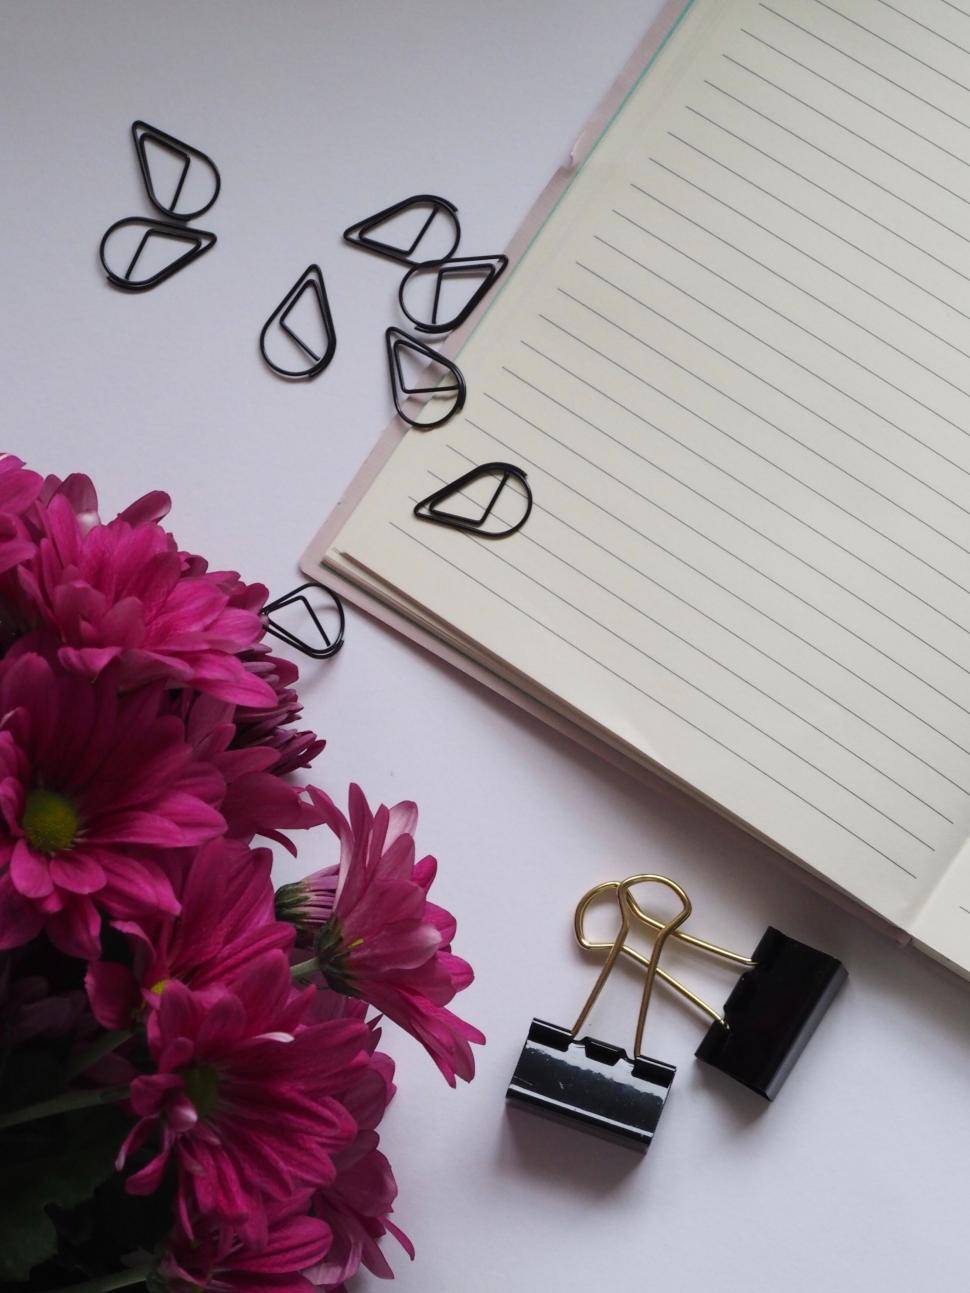 Free Image of Notepad and flowers with office supplies 